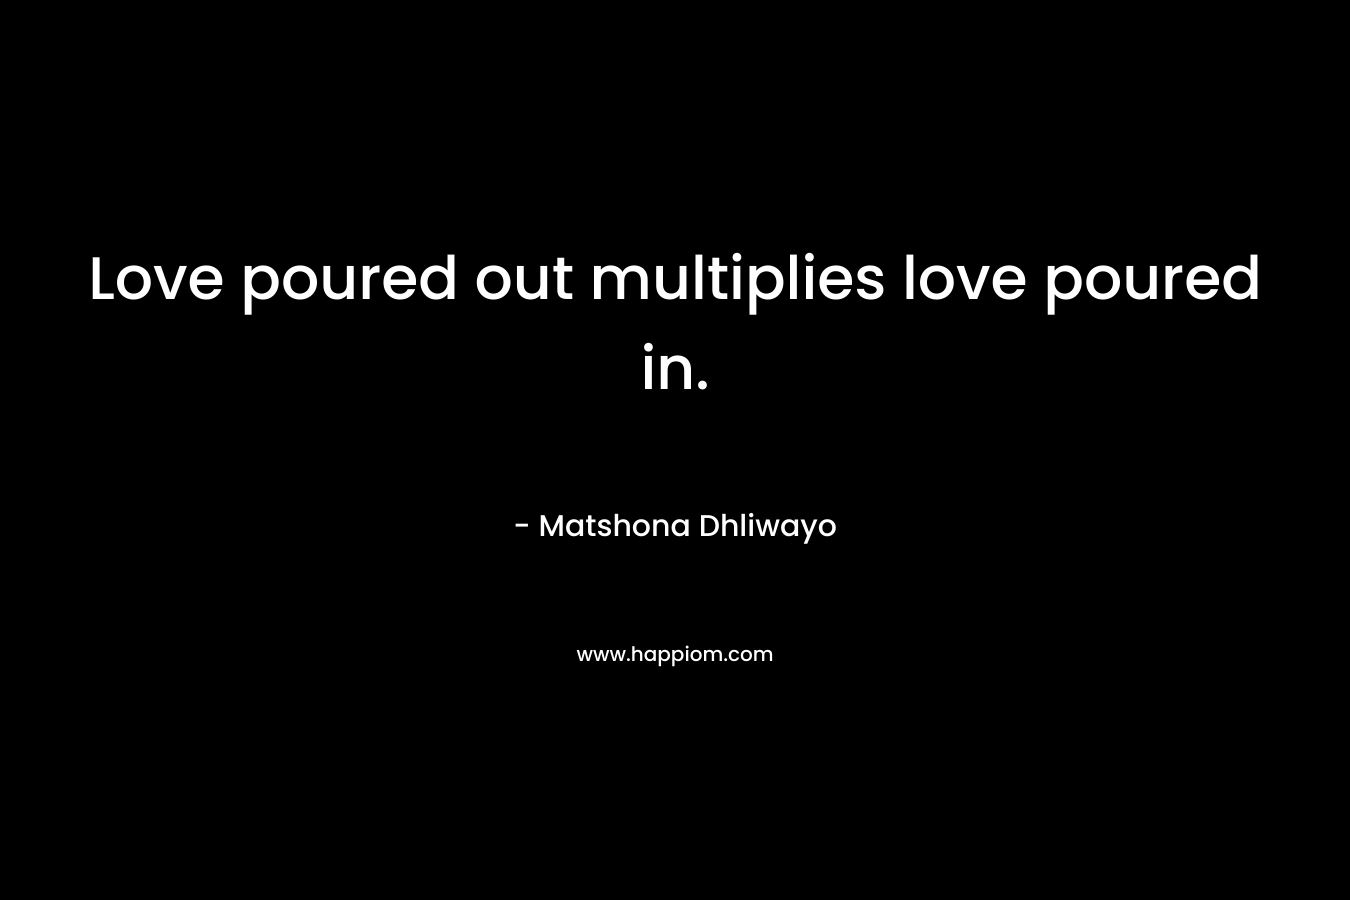 Love poured out multiplies love poured in. – Matshona Dhliwayo